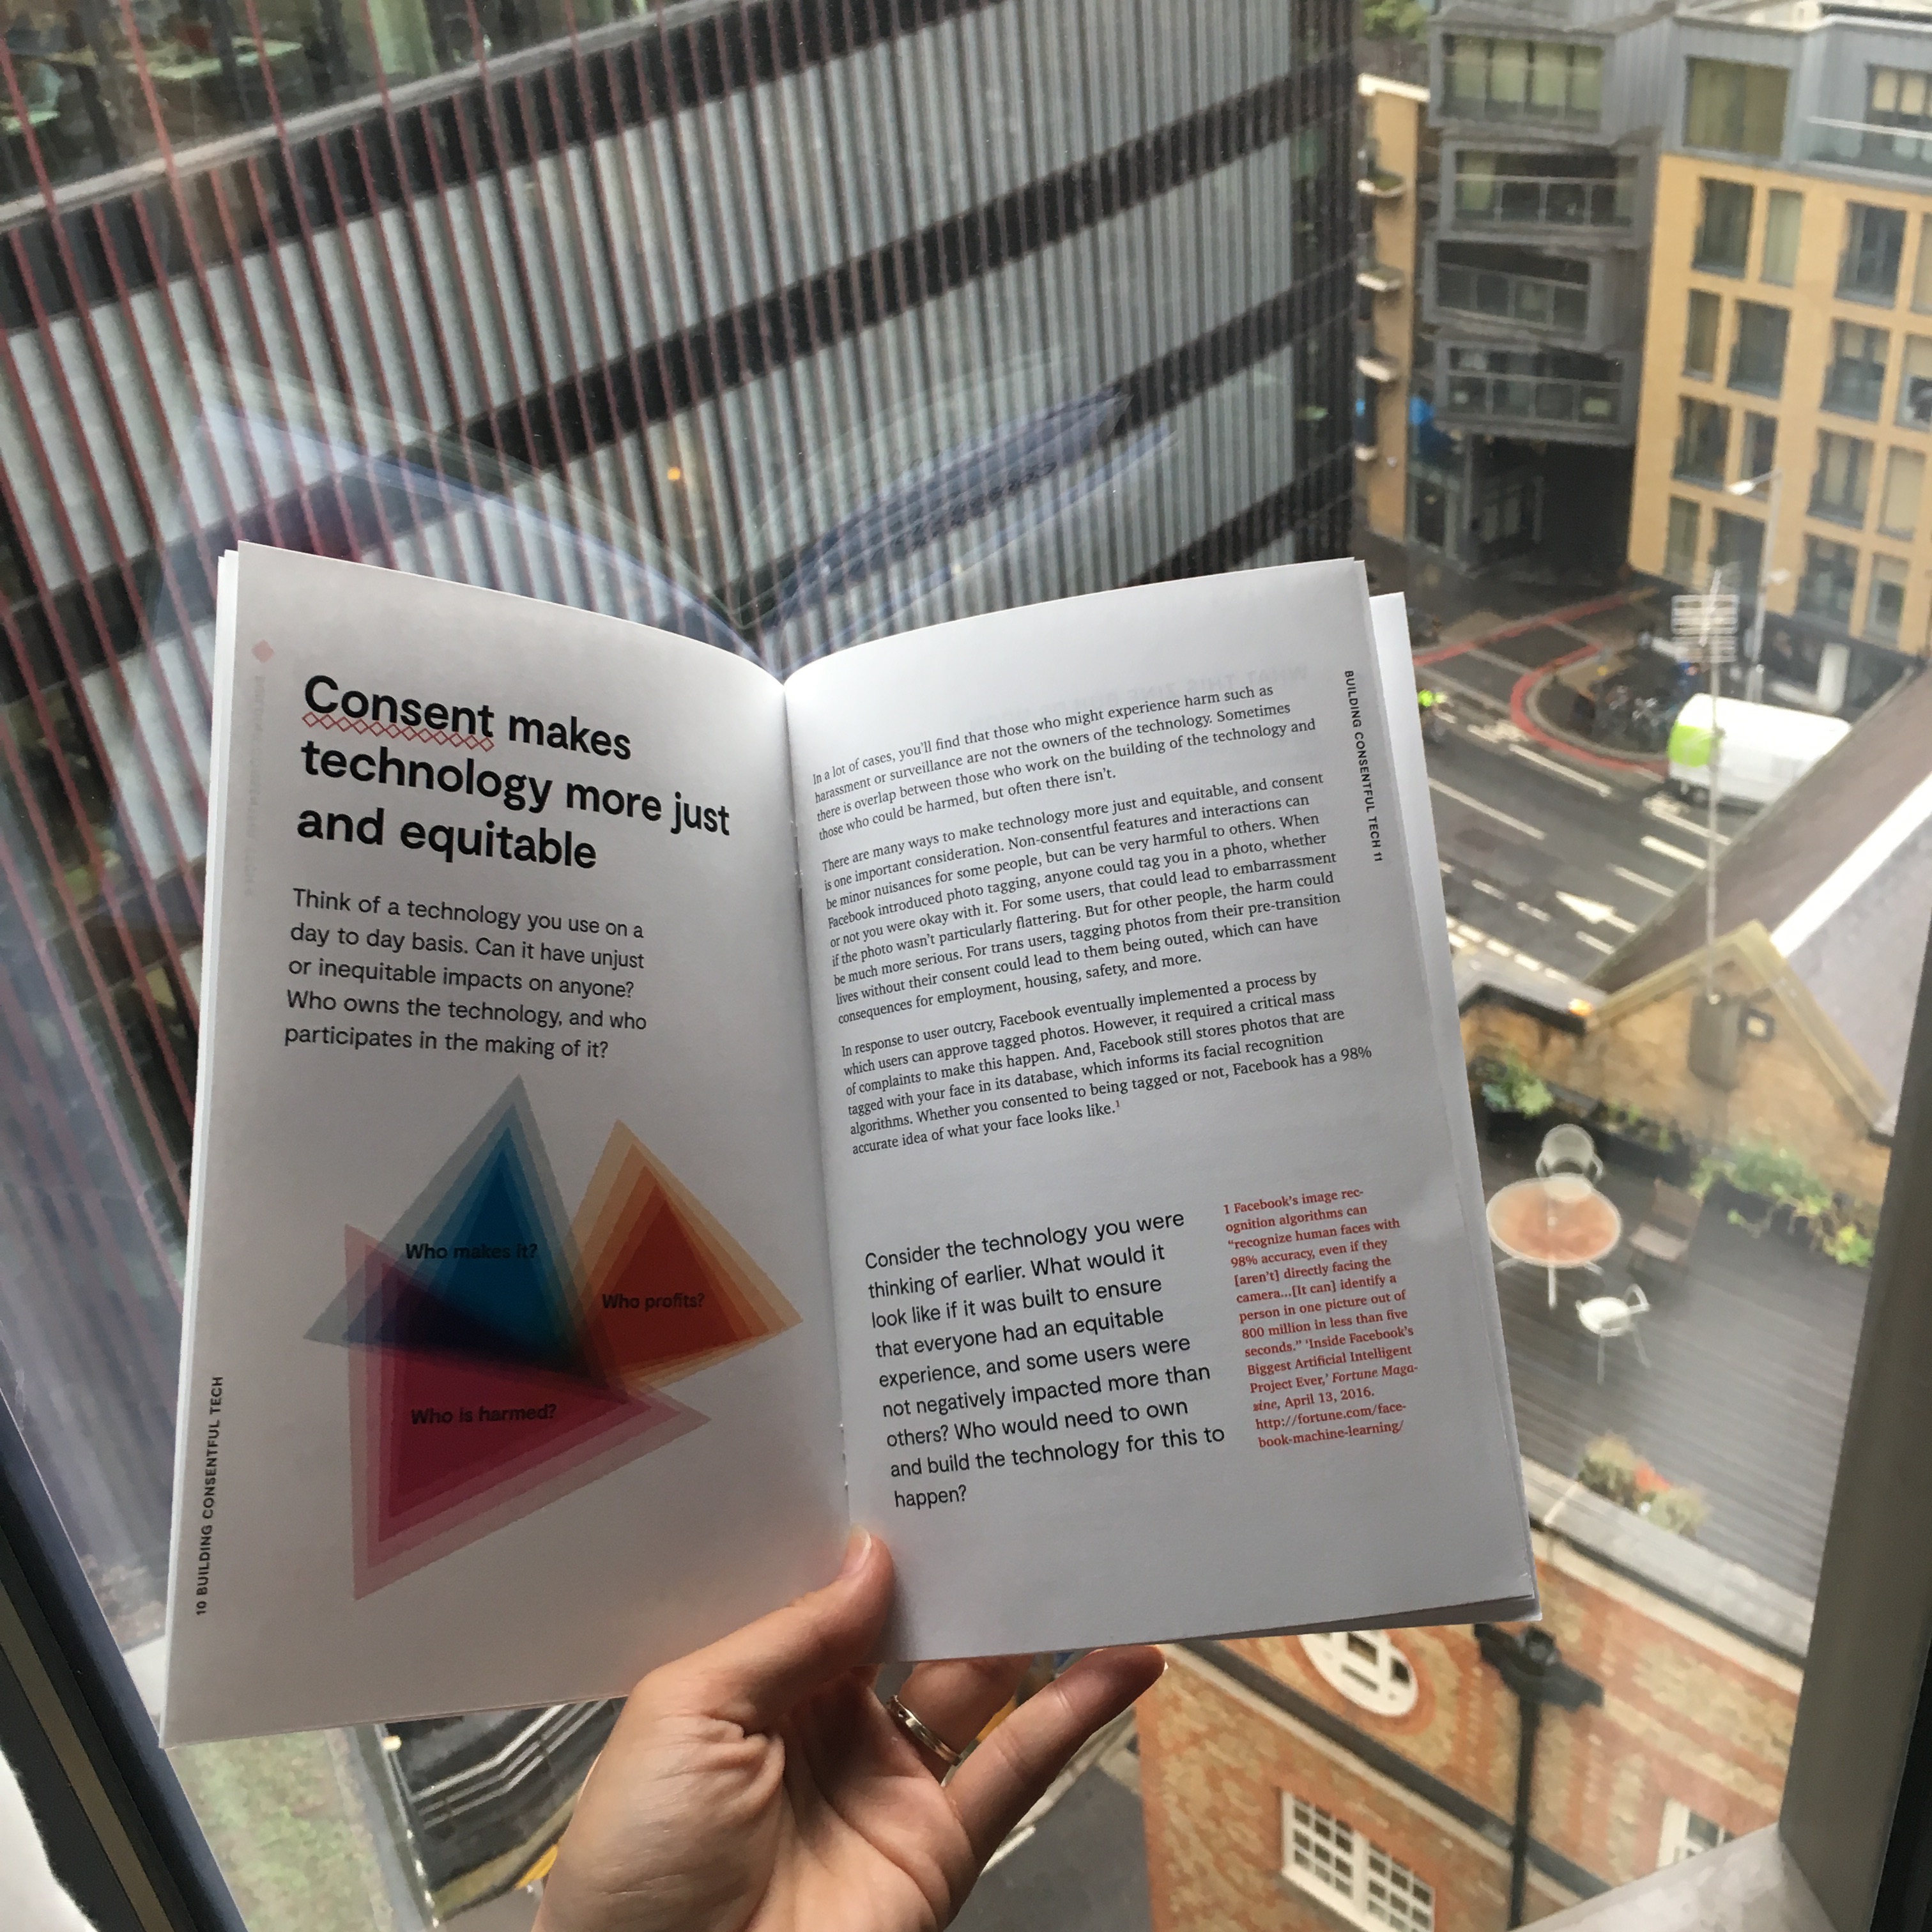 Photo: Una’s left hand holds open the Building Consentful Tech zine. The spread that is visible reads “Consent makes technology more just and equitable” and there is a graphic showing three intersecting triangles with the labels “Who makes it?” “Who profits?” and “Who is harmed?” Behind the zine is a window overlooking a streetscape in London.